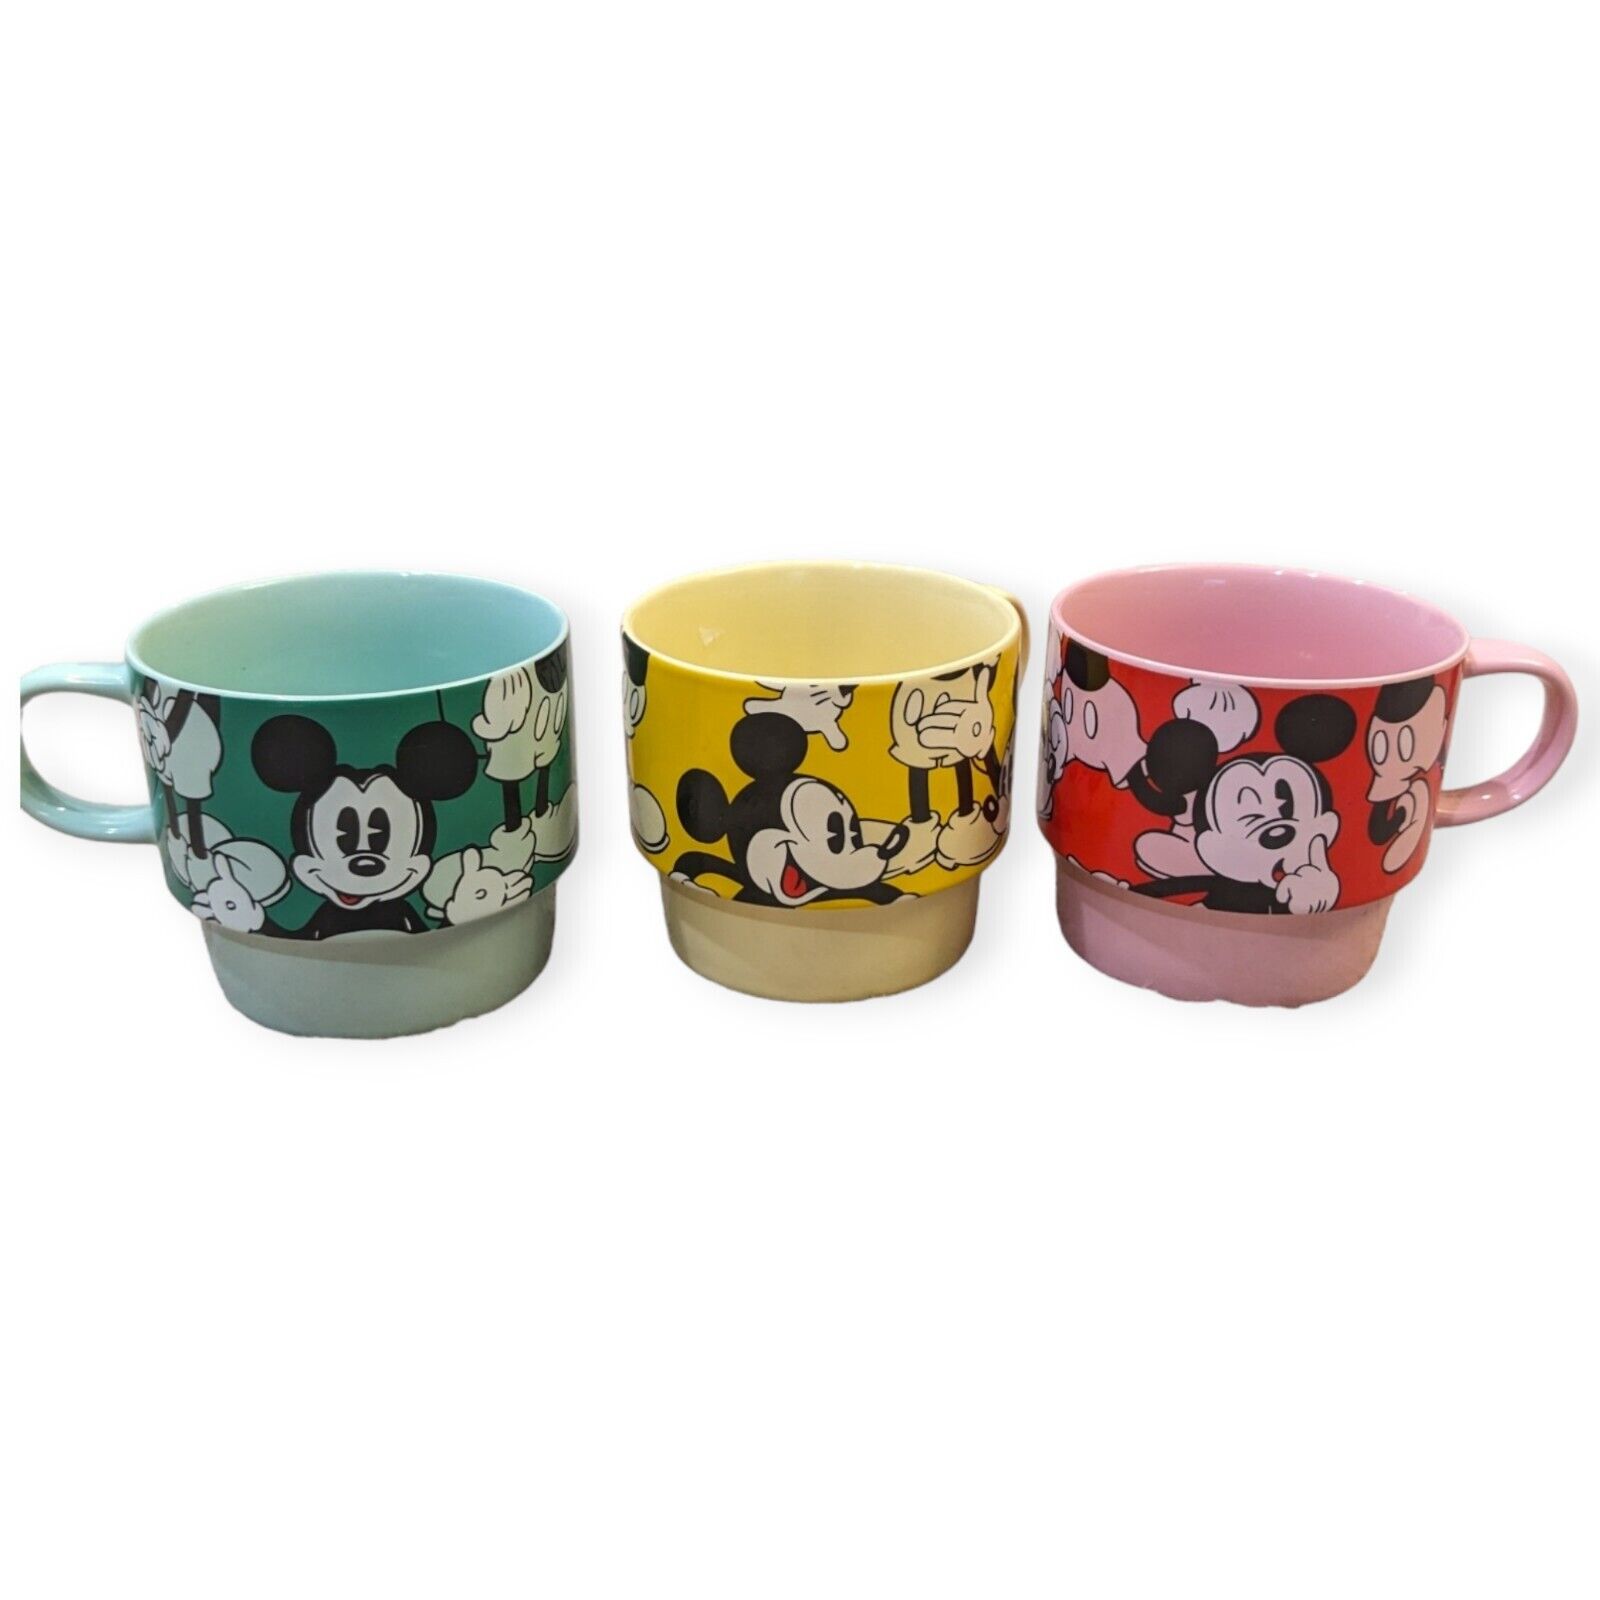 Vintage Mickey Mouse Set Of 3 Coffee Mugs Made In Japan